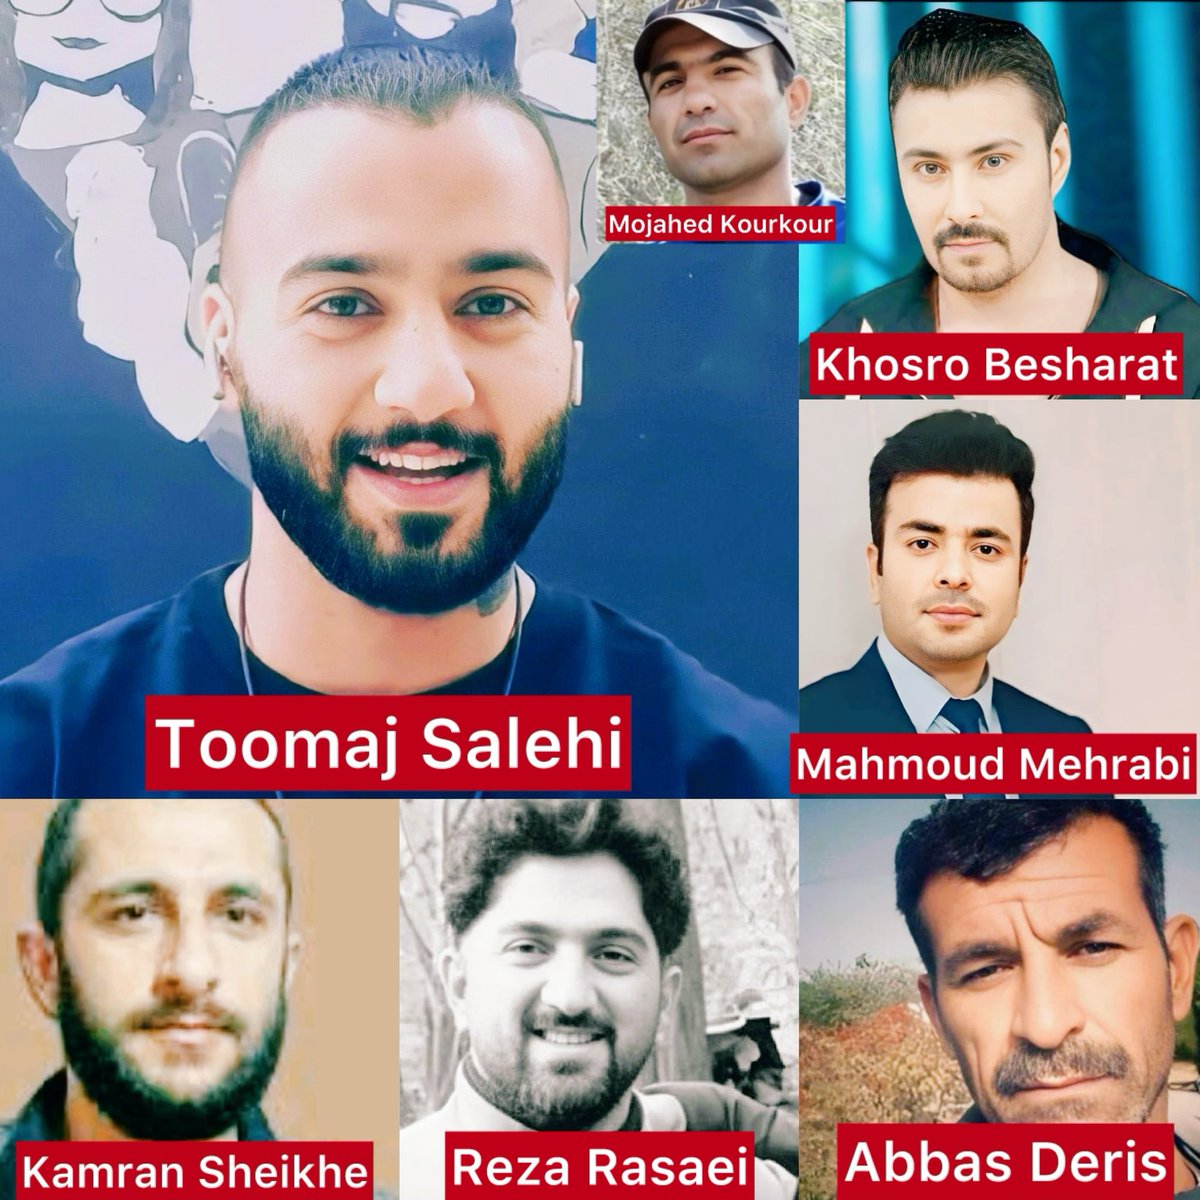 ‼️They've received DEATH PENALTY from islamic regime in iran and in a death row for EXECUTION ‼️

Be their voice !
#StopExecustionsInIran 
#نه_به_اعدام 
#FreeToomaj #ToomajSalehi #توماج_صالحى